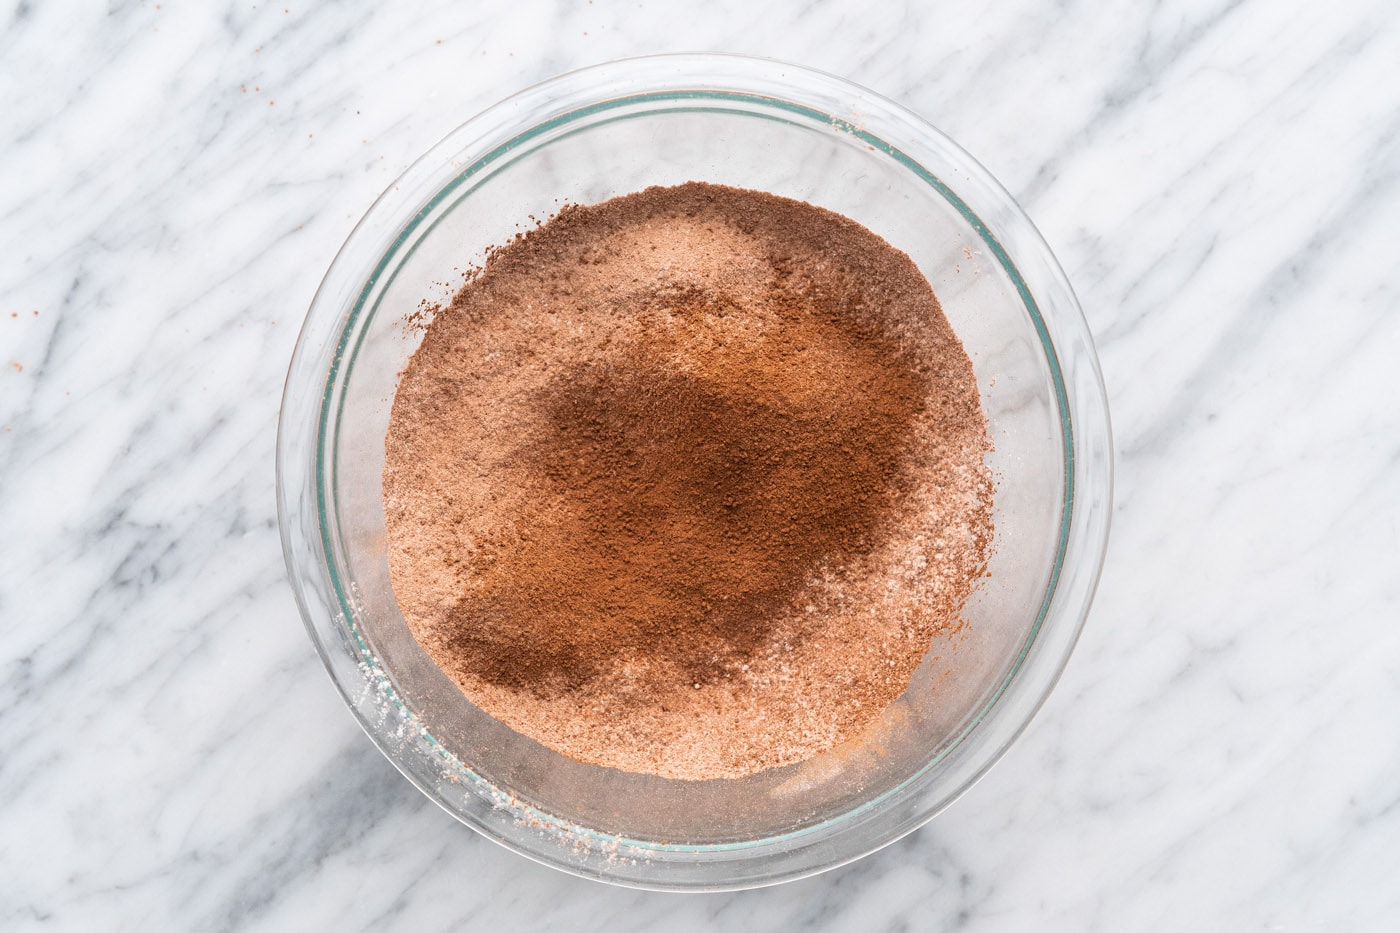 sifted flour, cocoa powder, salt, and baking soda